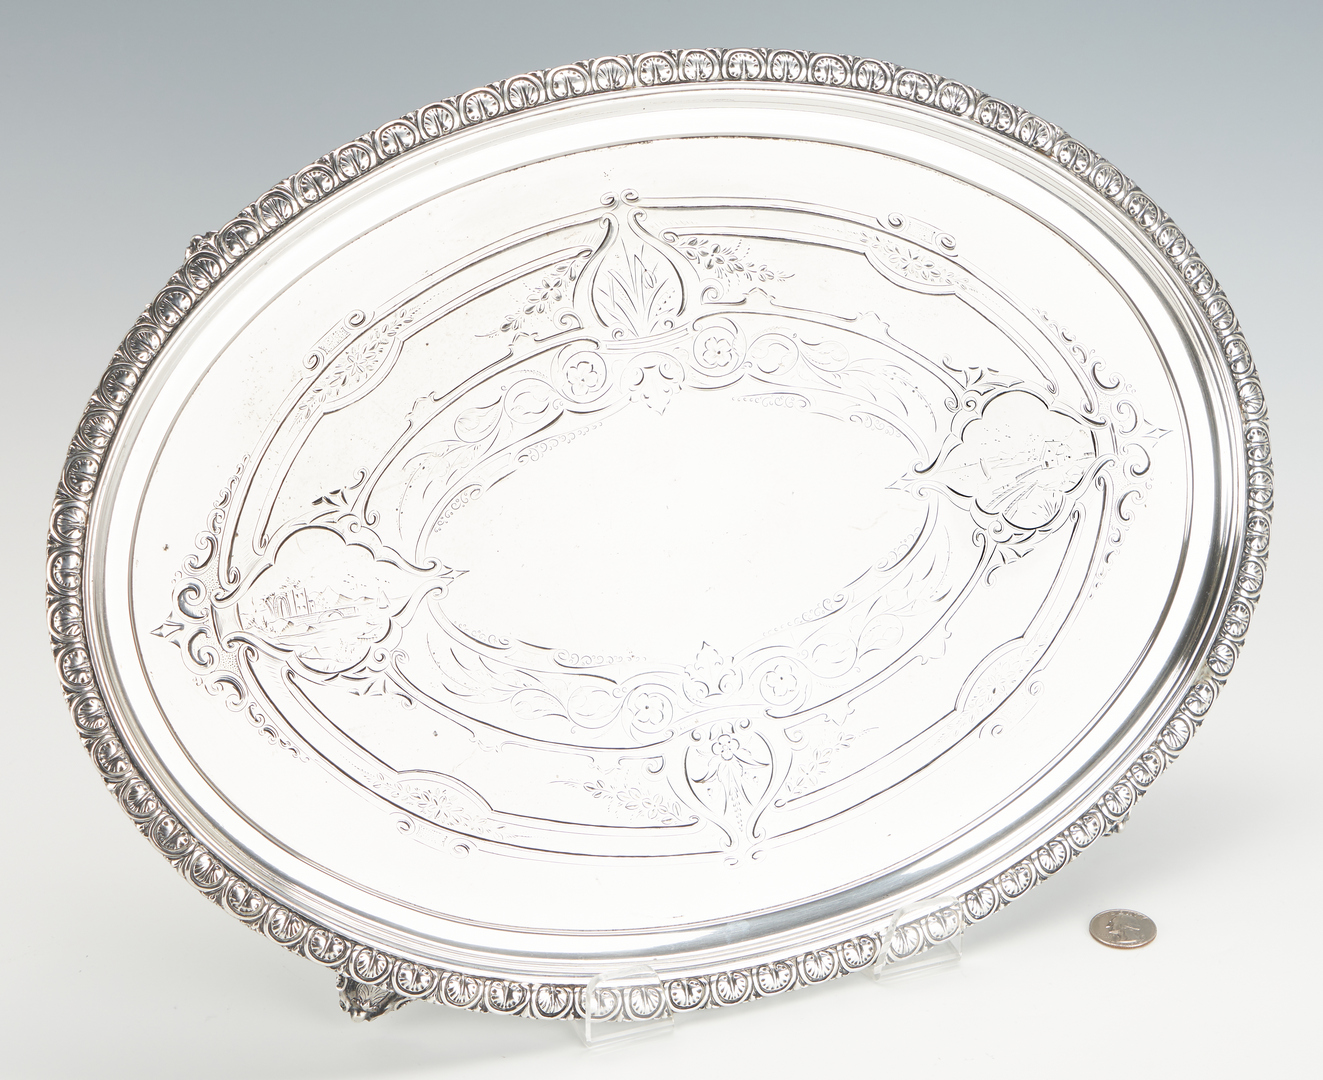 Lot 122: F. H. Clark & Co. Tennessee Coin Silver Tray